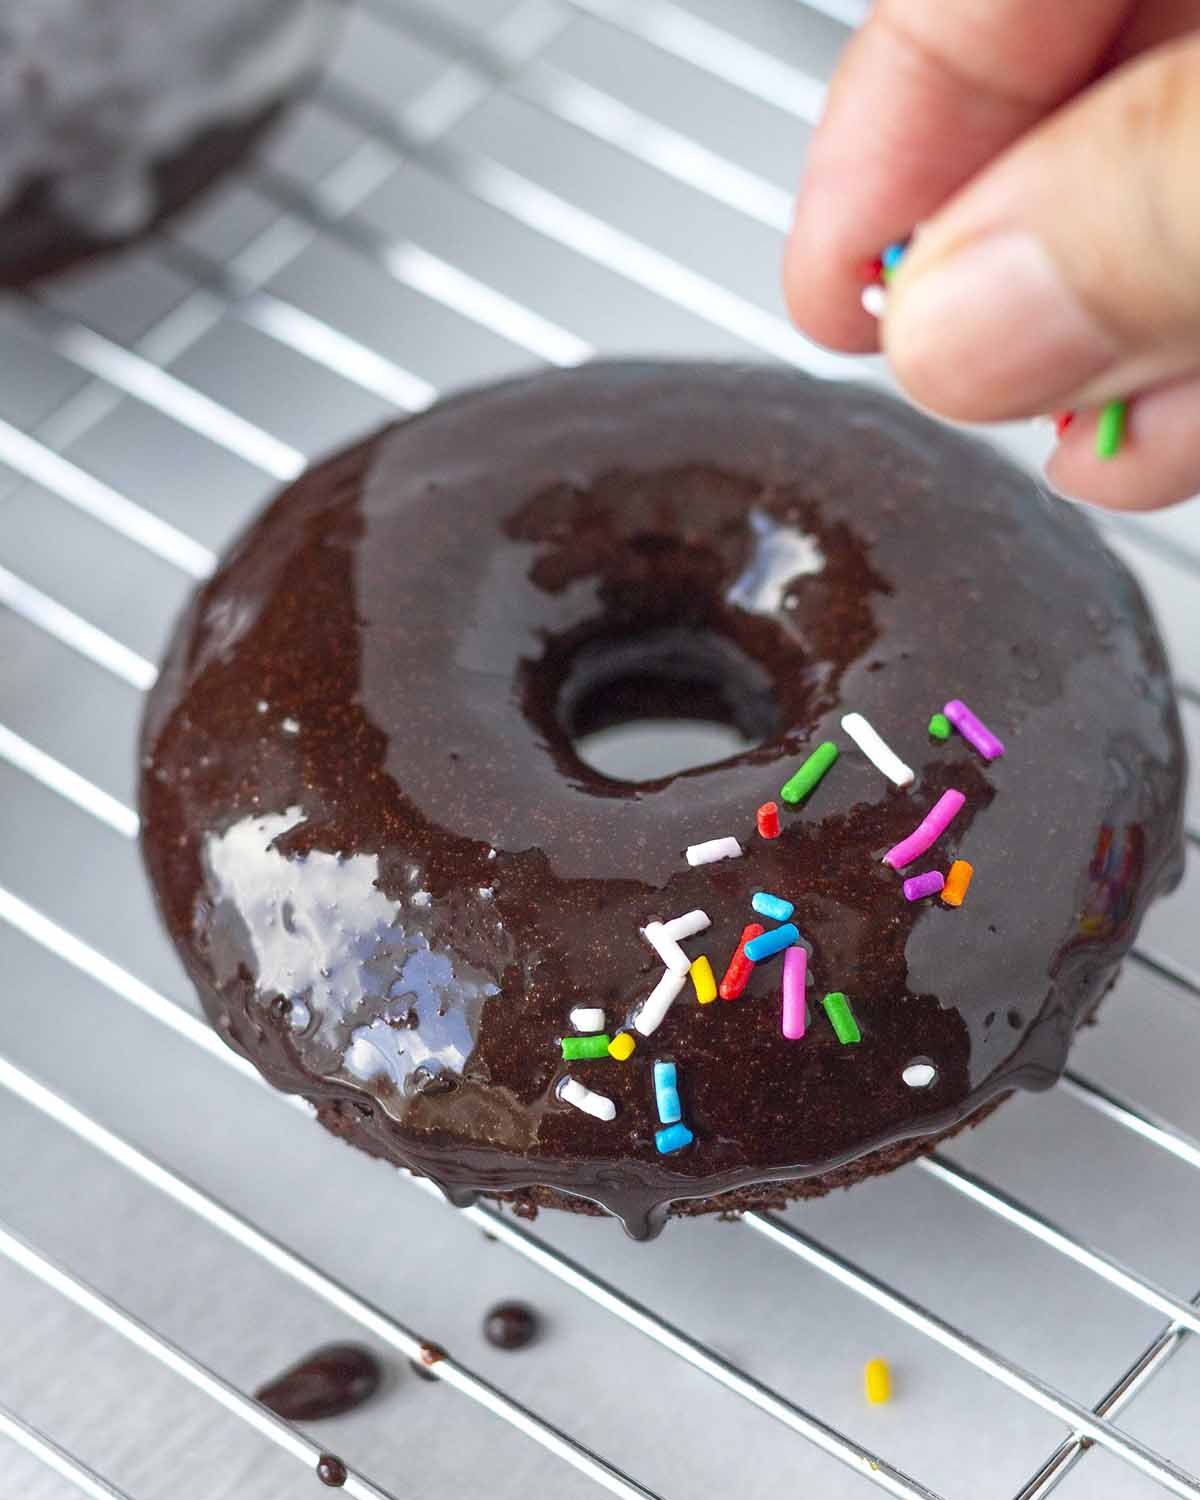 A hand adding sprinkles to a freshly dipped chocolate donut.